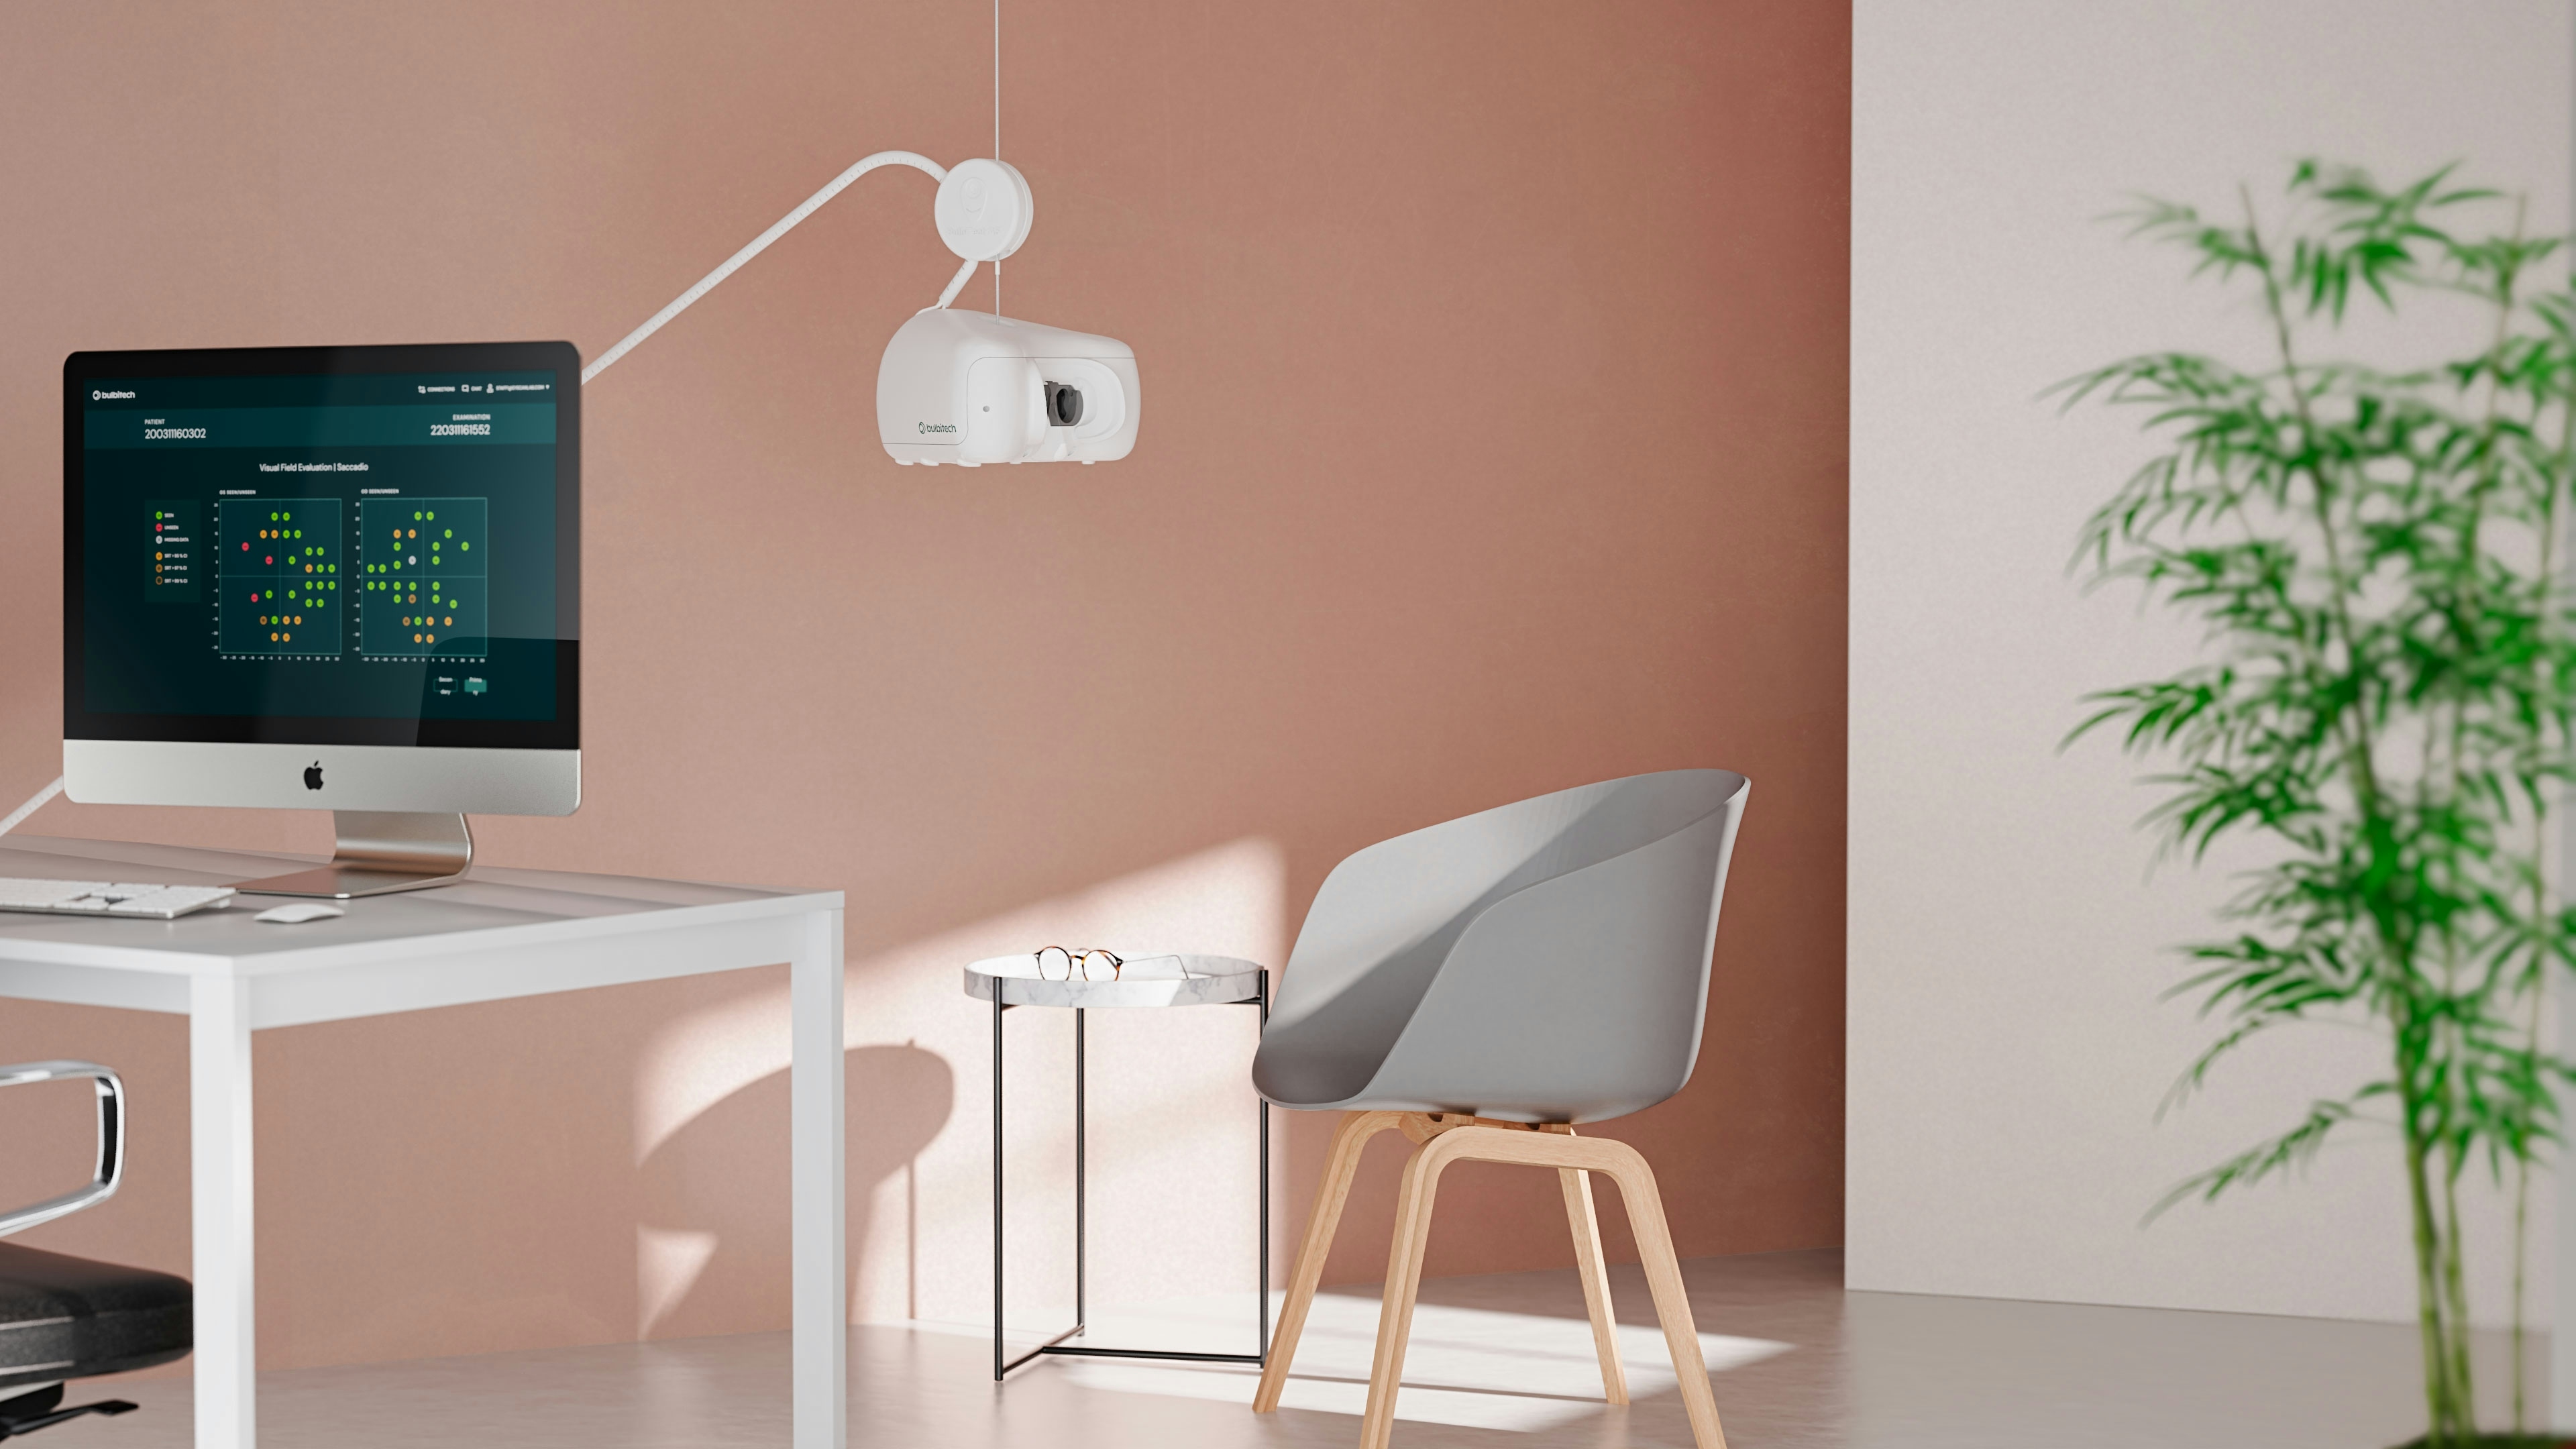 A white desk with a desktop screen showing a software program on the screen and an eye examination device hanging over the table. A gray chair in front of the desk. A light peach and a white coloured wall behind, as well as a green plant. Render. 